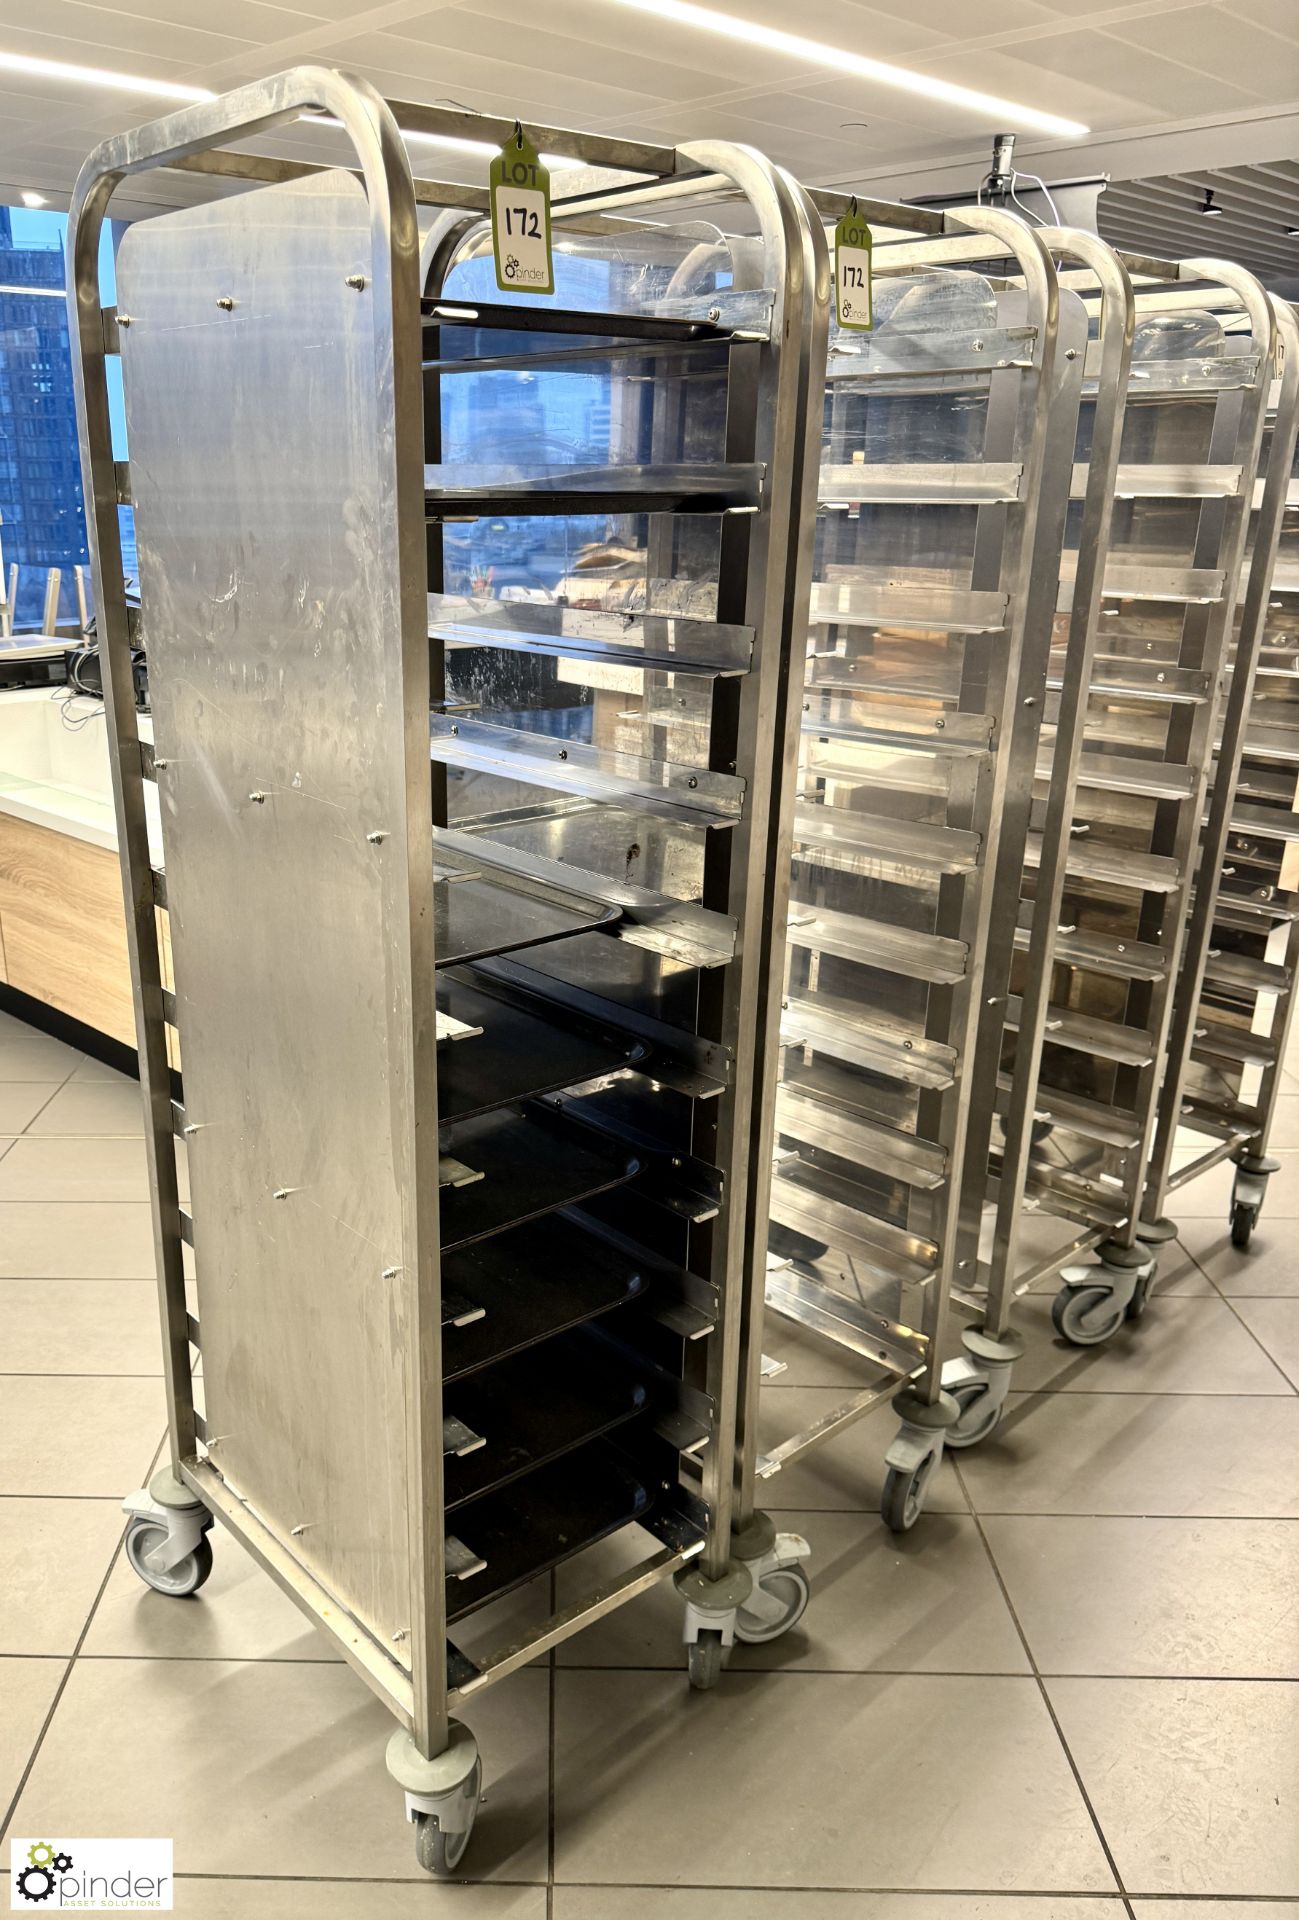 2 stainless steel 10-tray Trolleys (location in building - level 11 main canteen) - Image 2 of 3